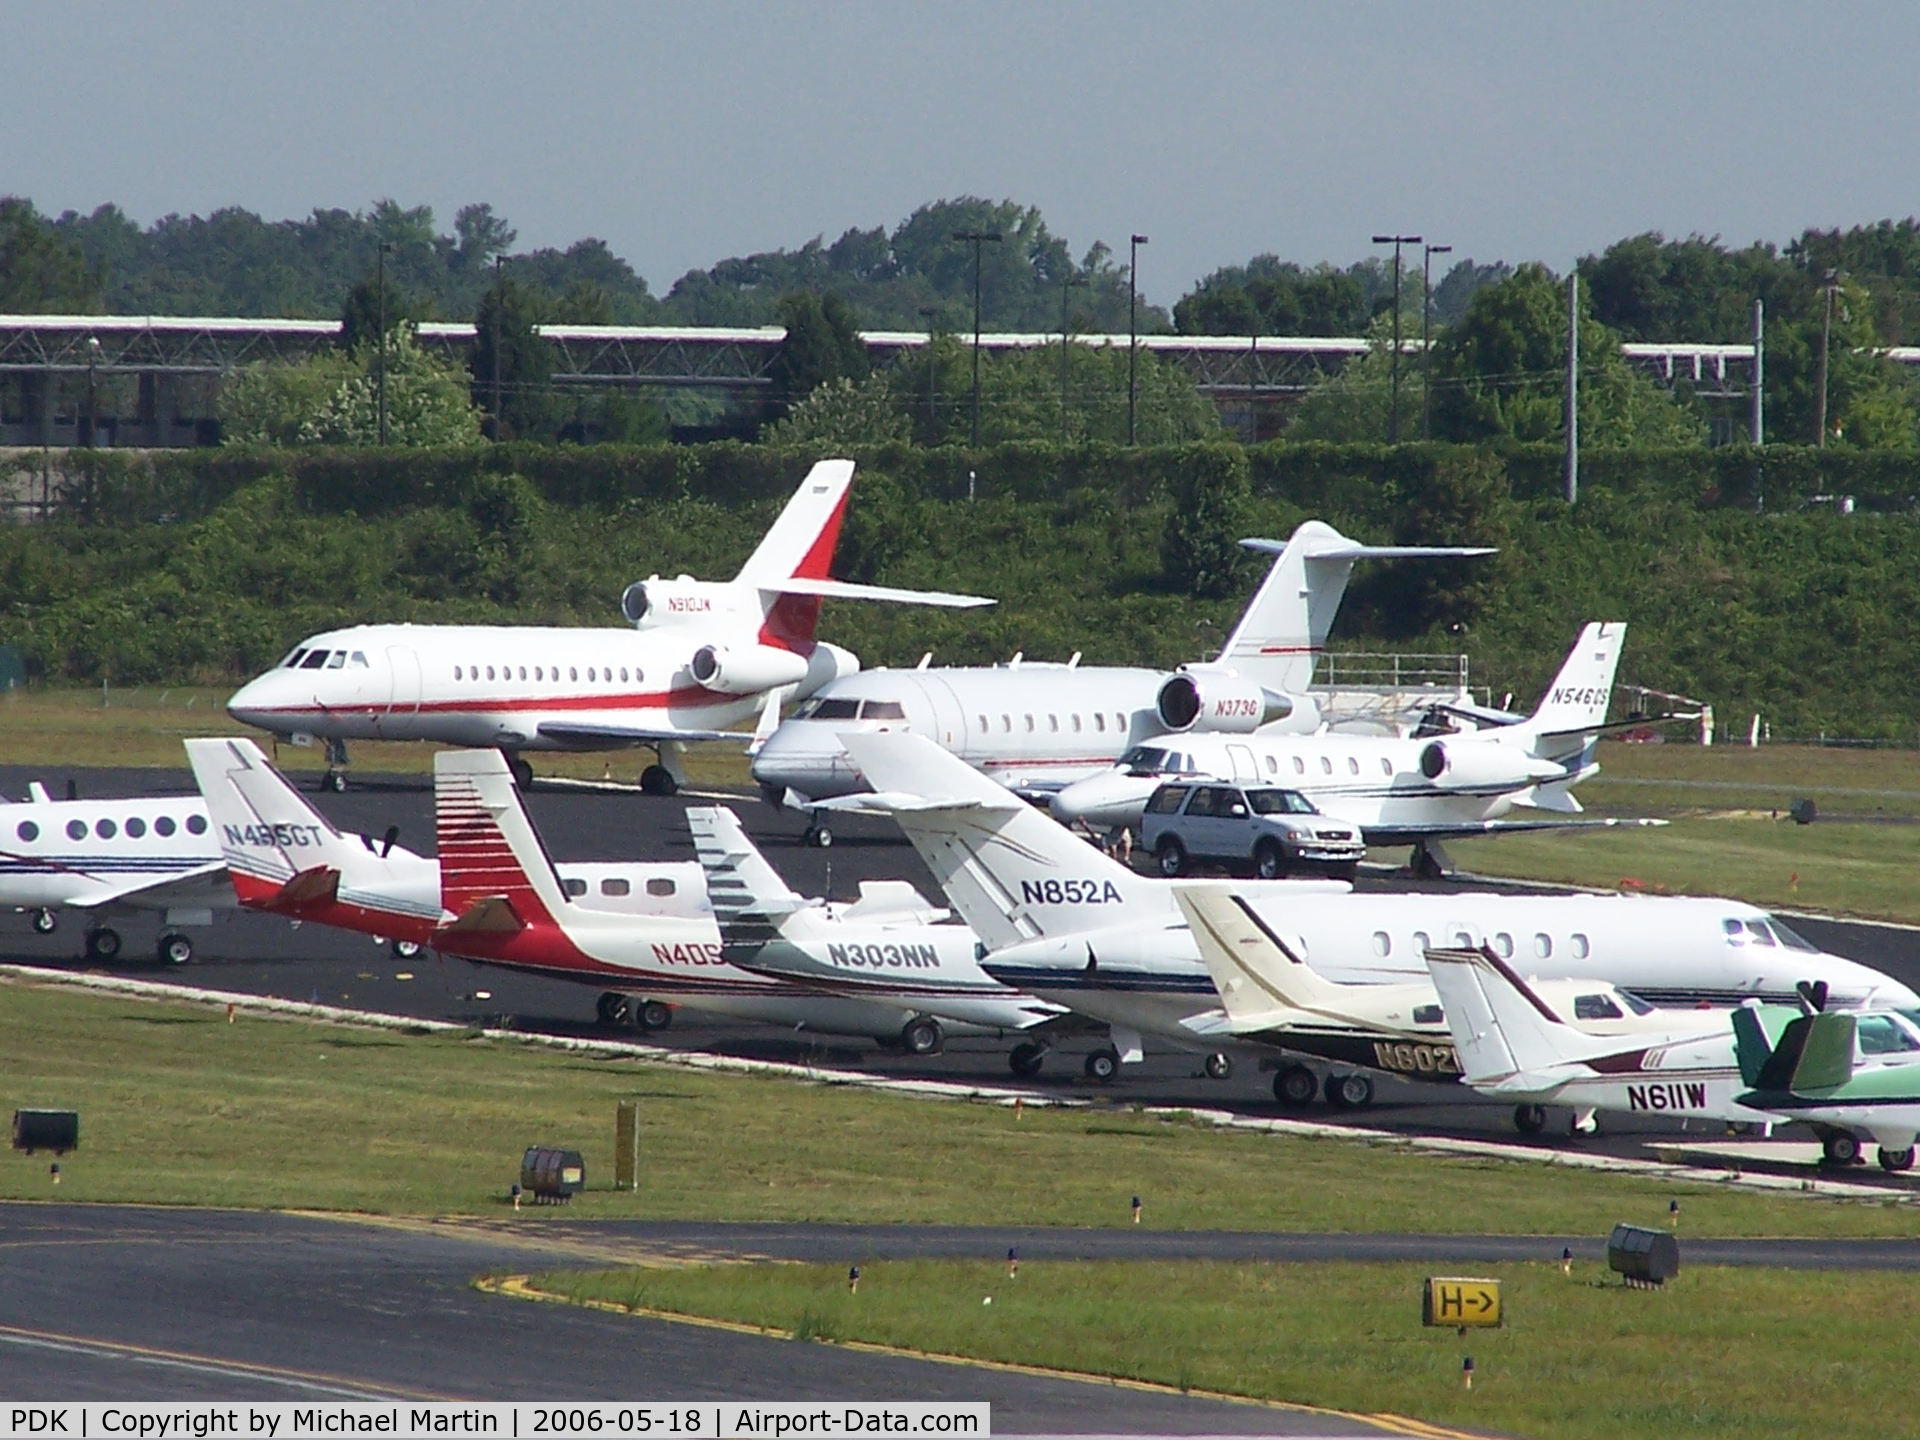 Dekalb-peachtree Airport (PDK) - Pretty maids all in a row!